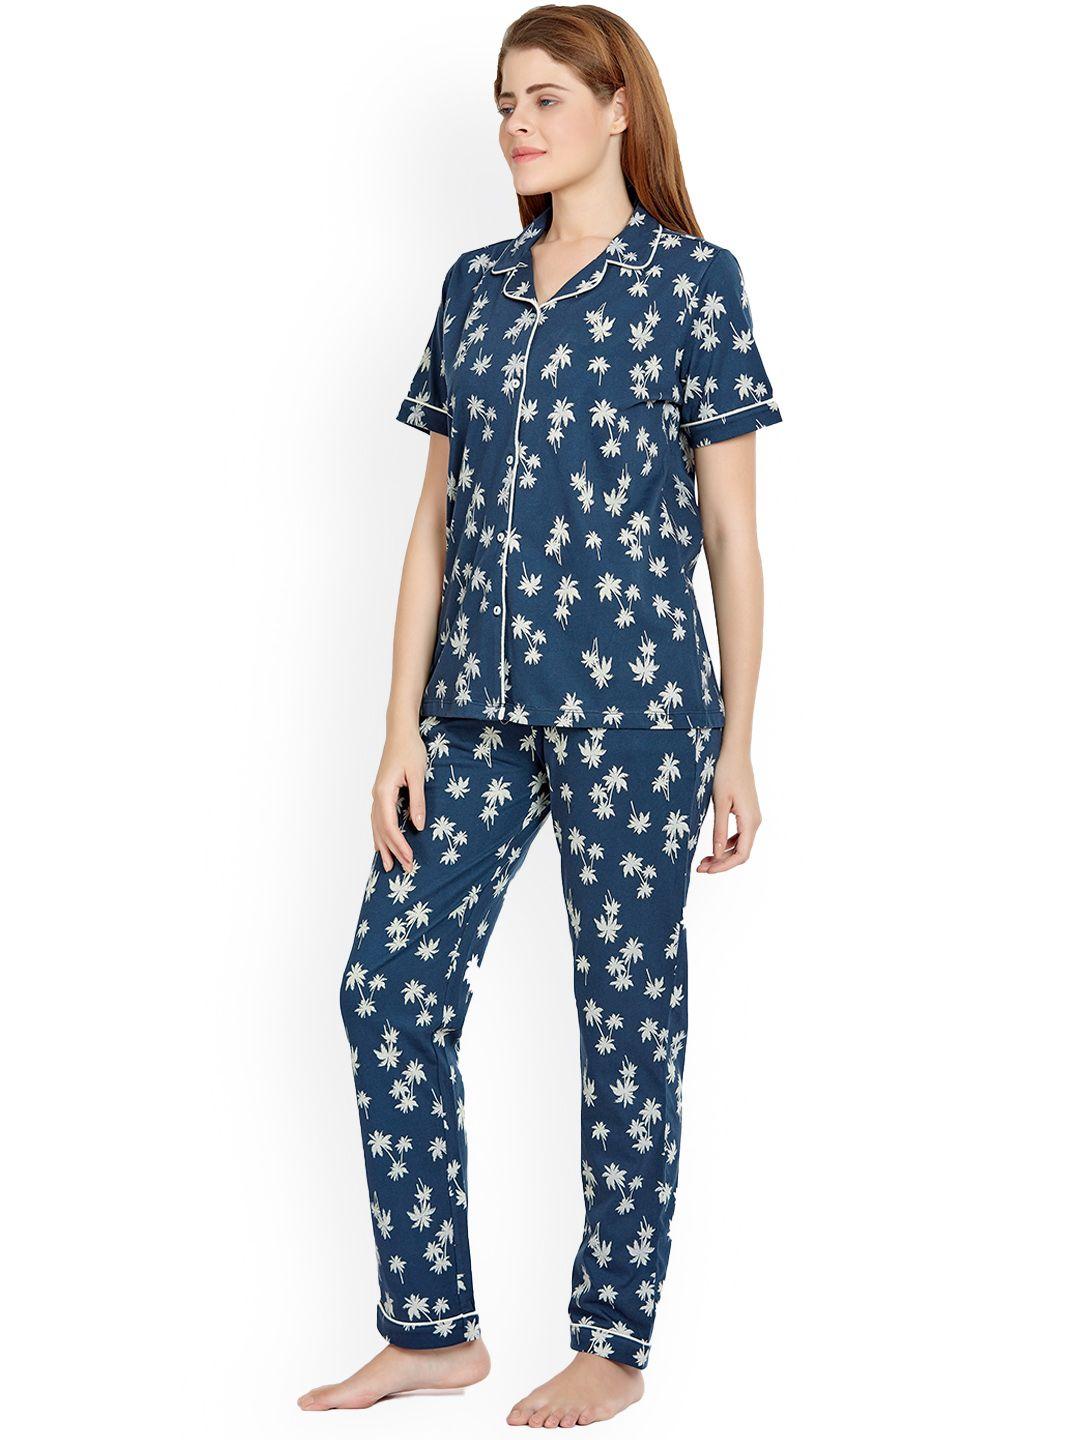 maysixty-women-navy-blue-&-off-white-printed-night-suit